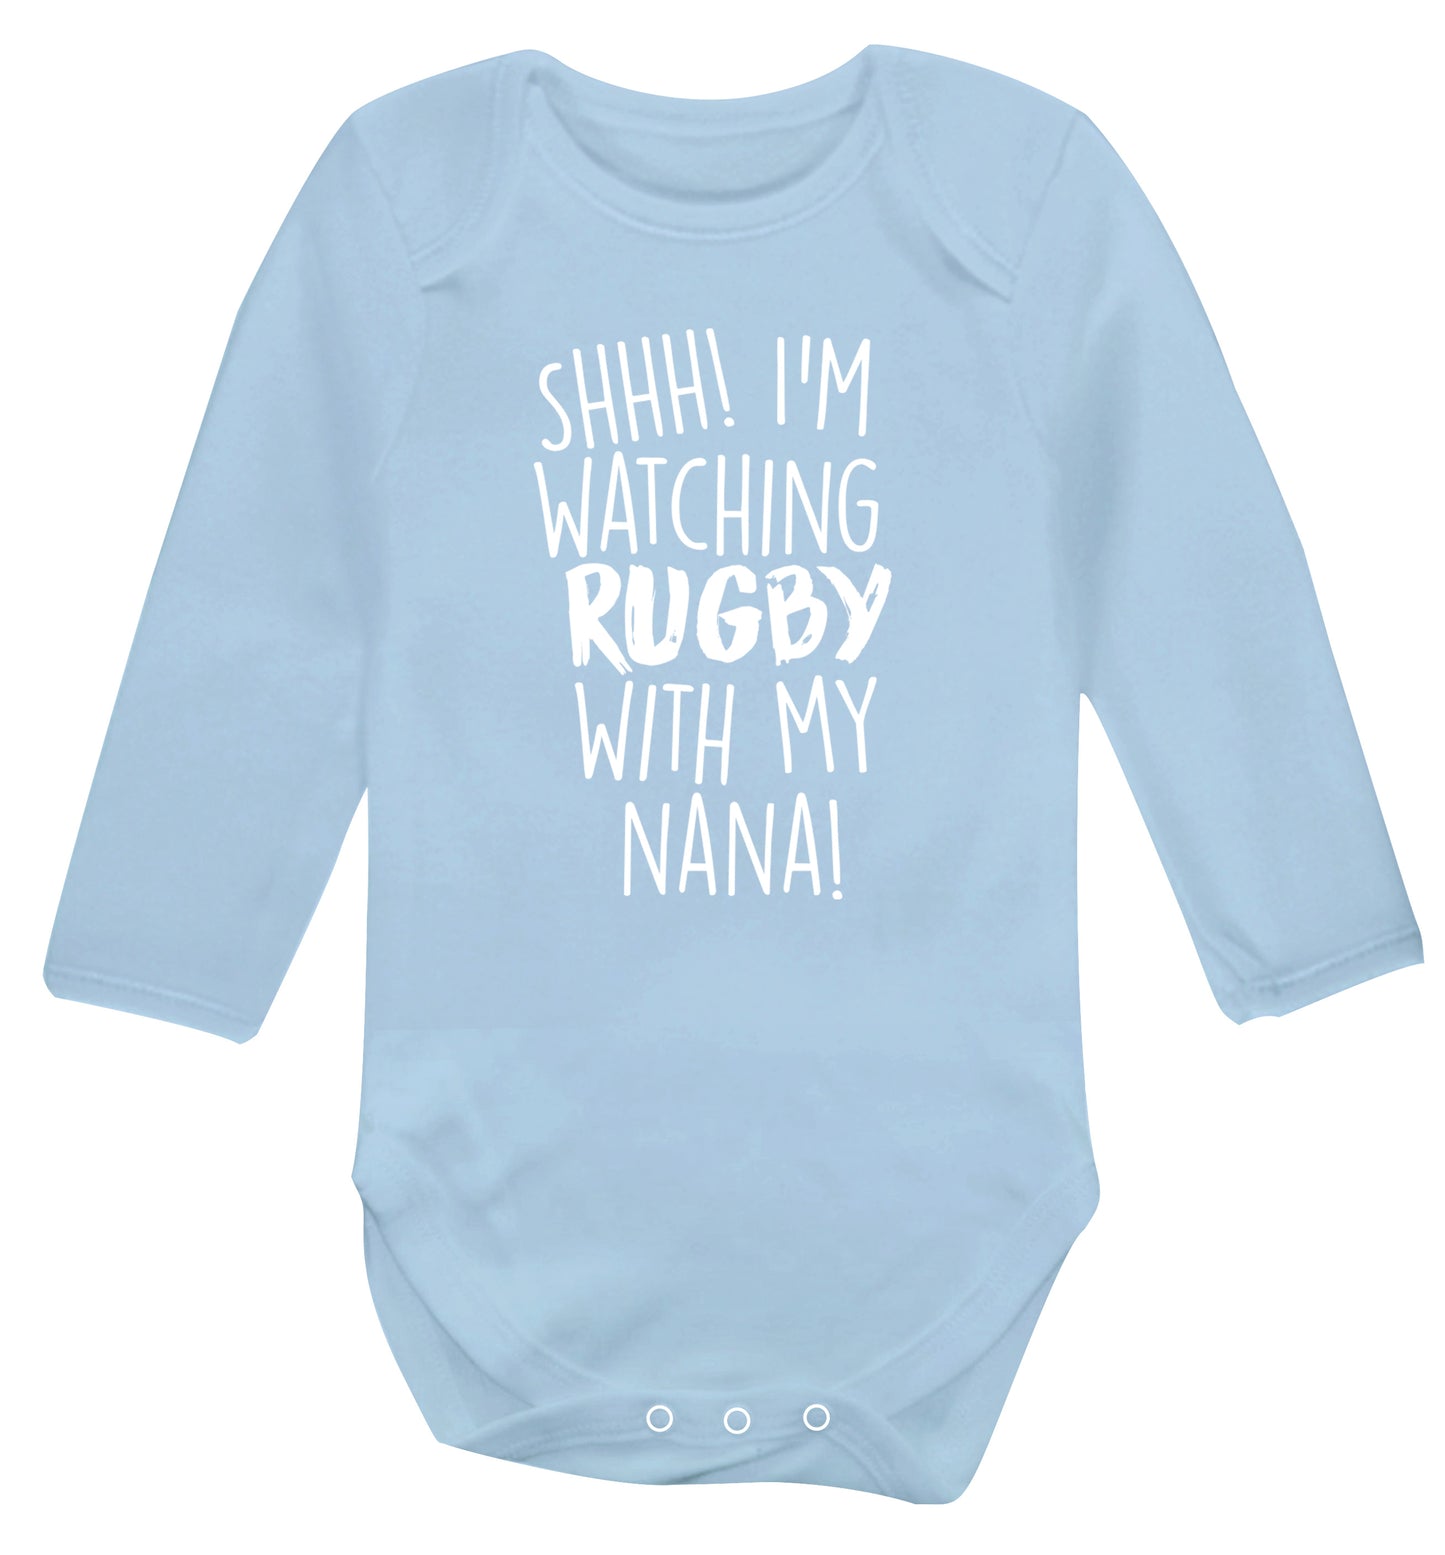 Shh I'm watching rugby with my nana Baby Vest long sleeved pale blue 6-12 months